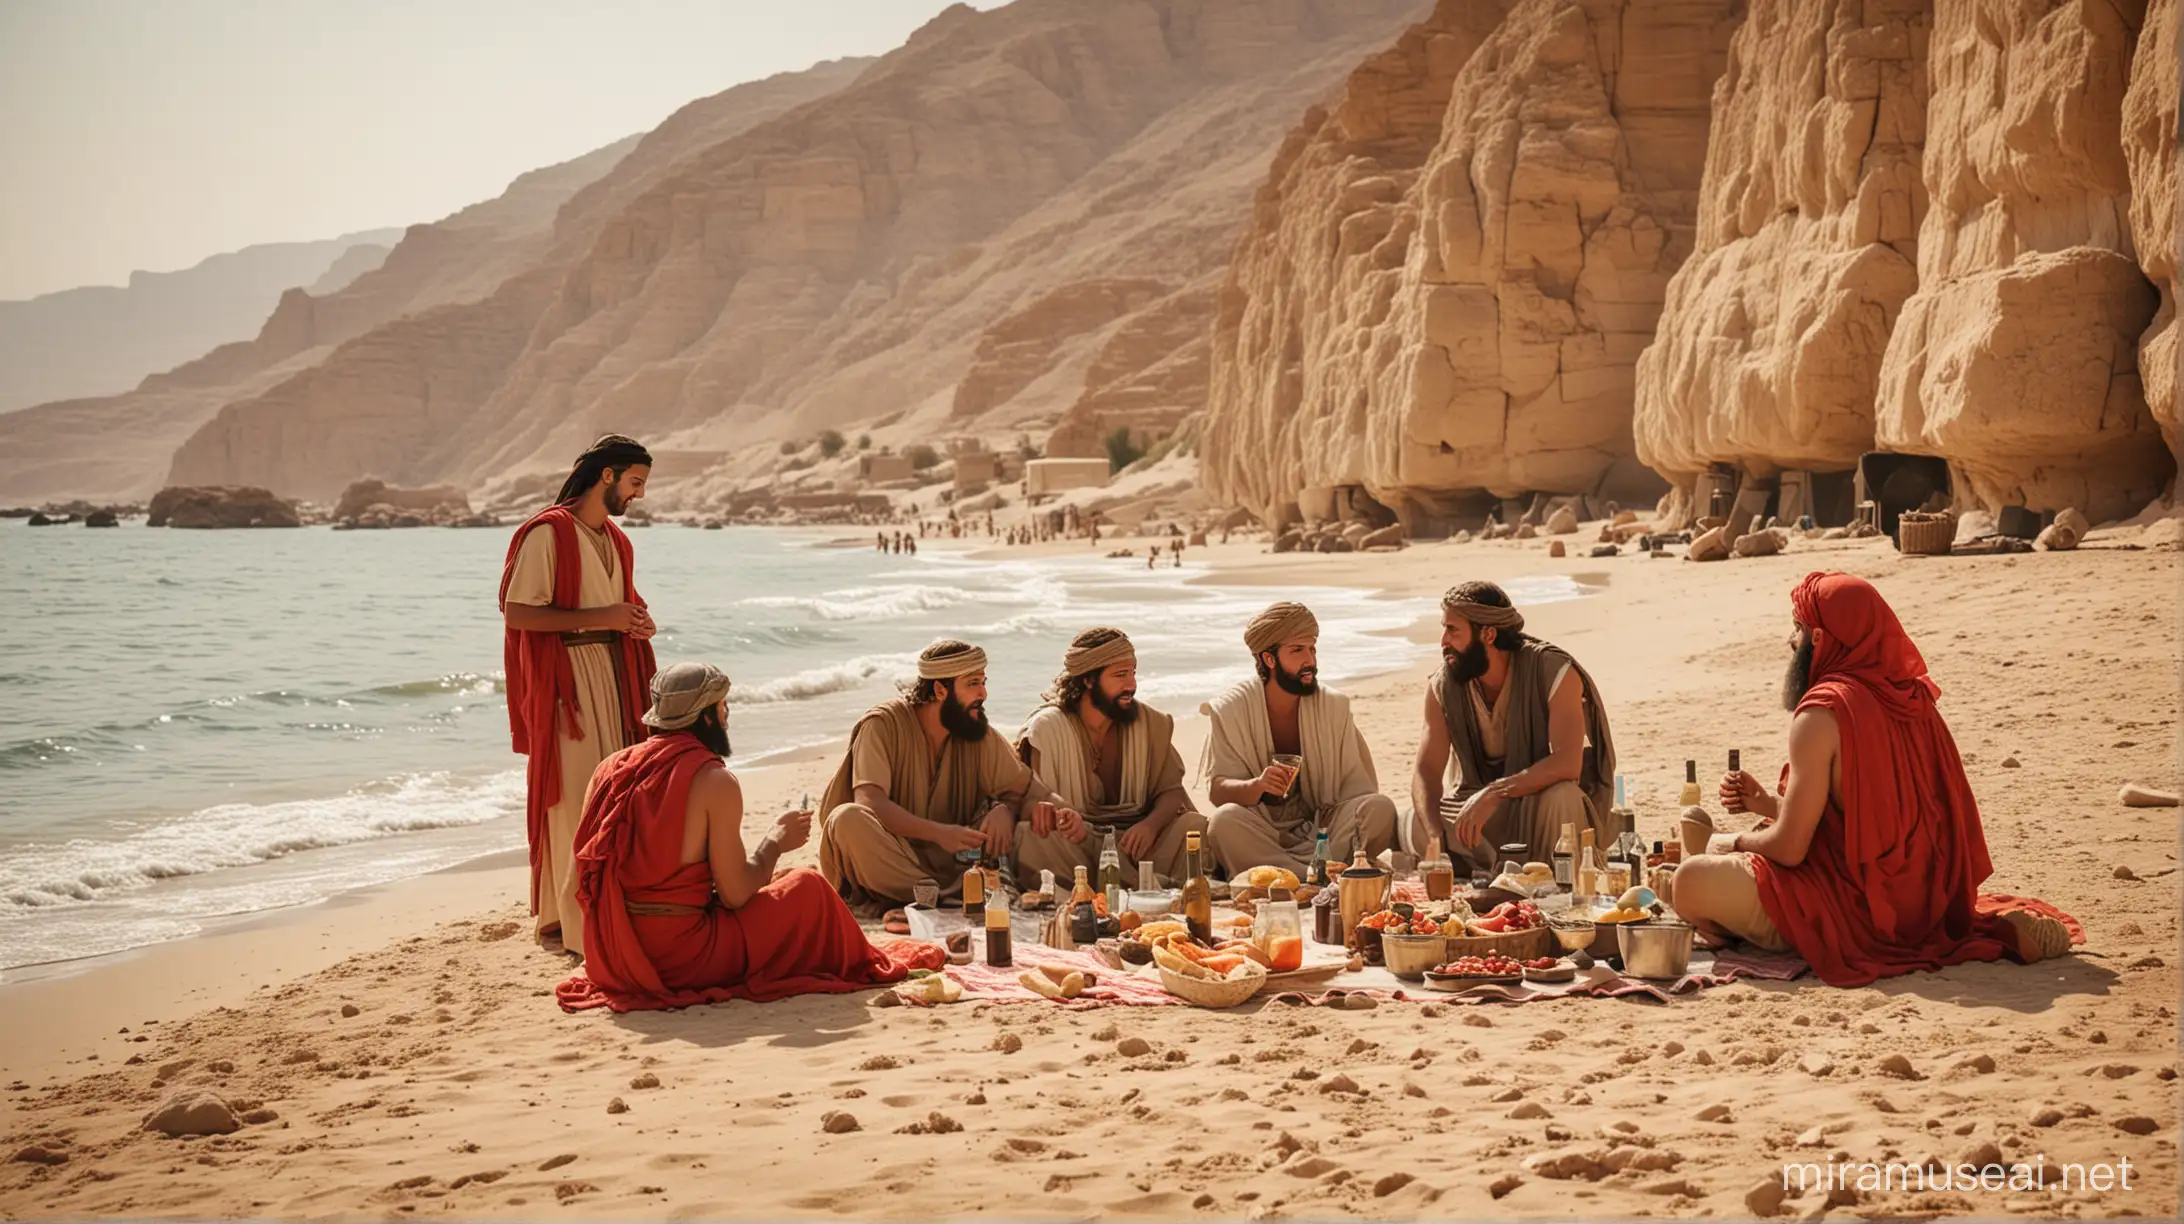 On the shores of the Red Sea.
3000 years ago.
People dressed as ancient Israelites.
People having a pic nic and drinking alcohol.
